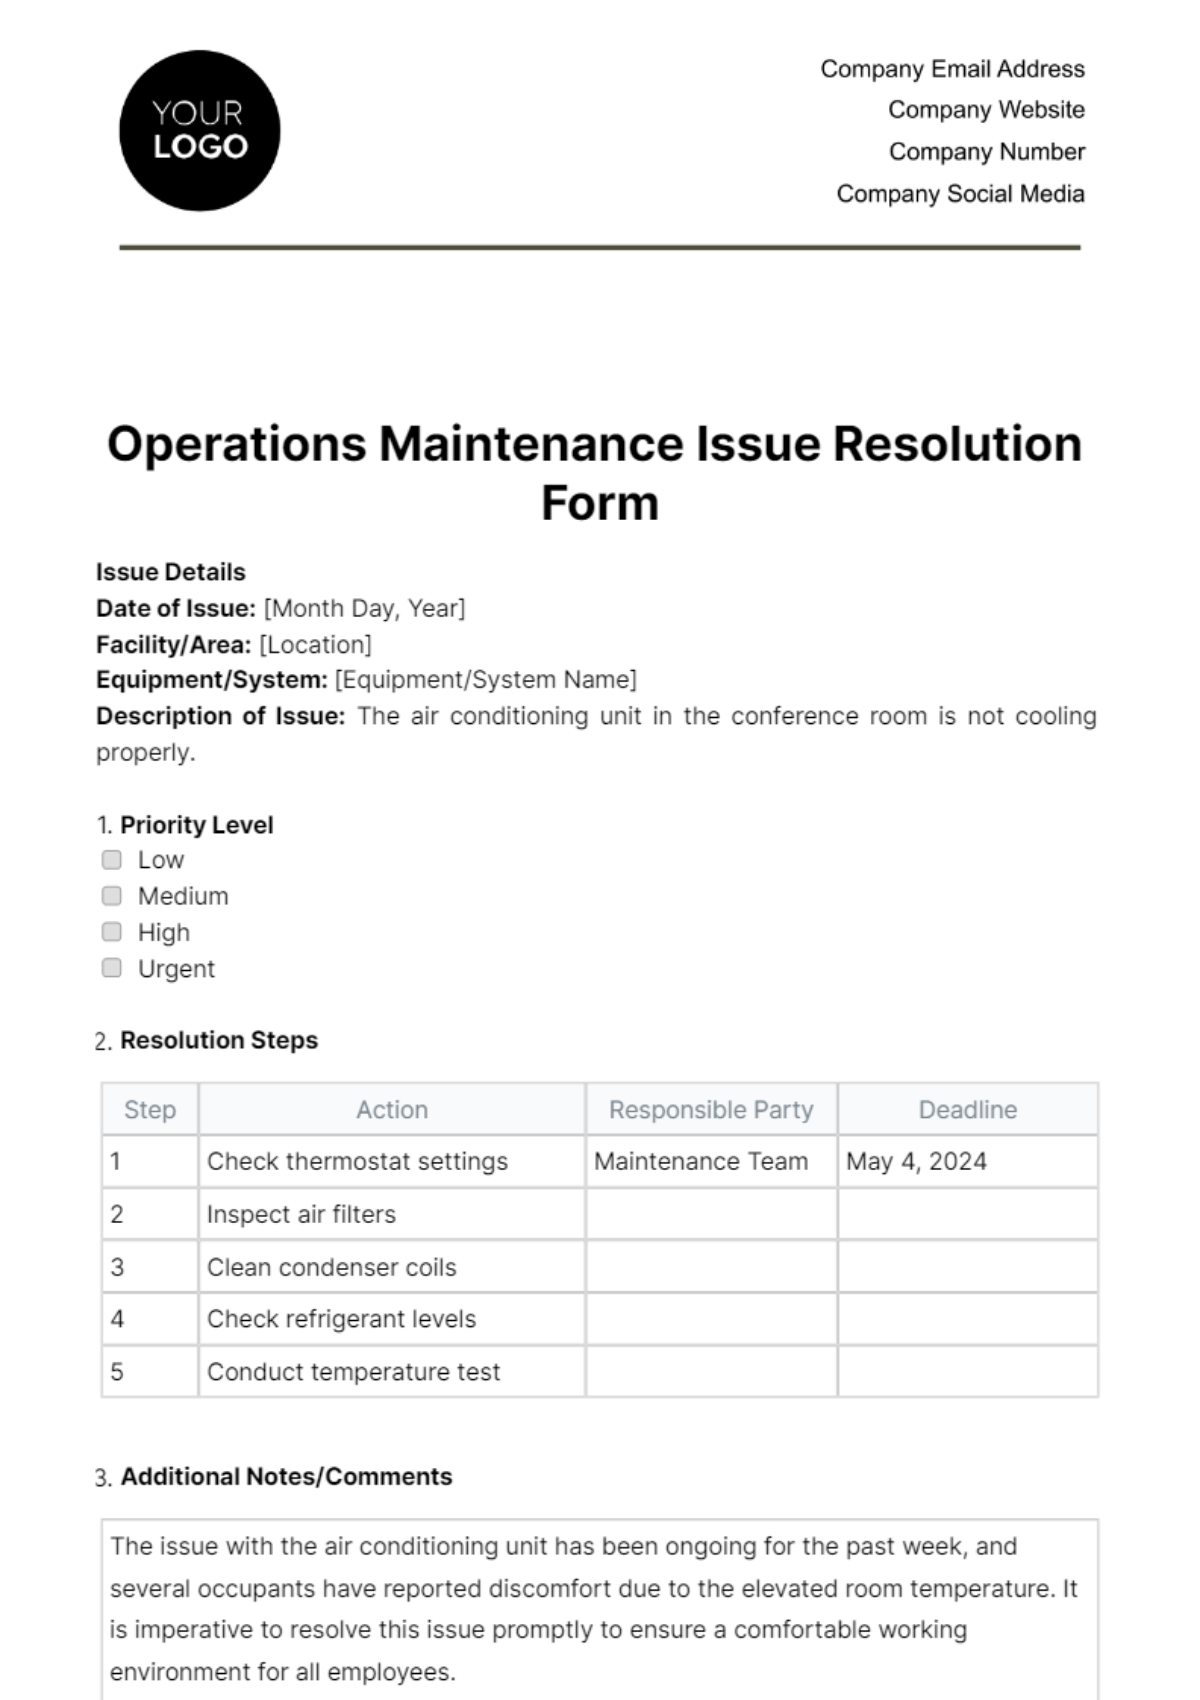 Free Operations Maintenance Issue Resolution Form Template